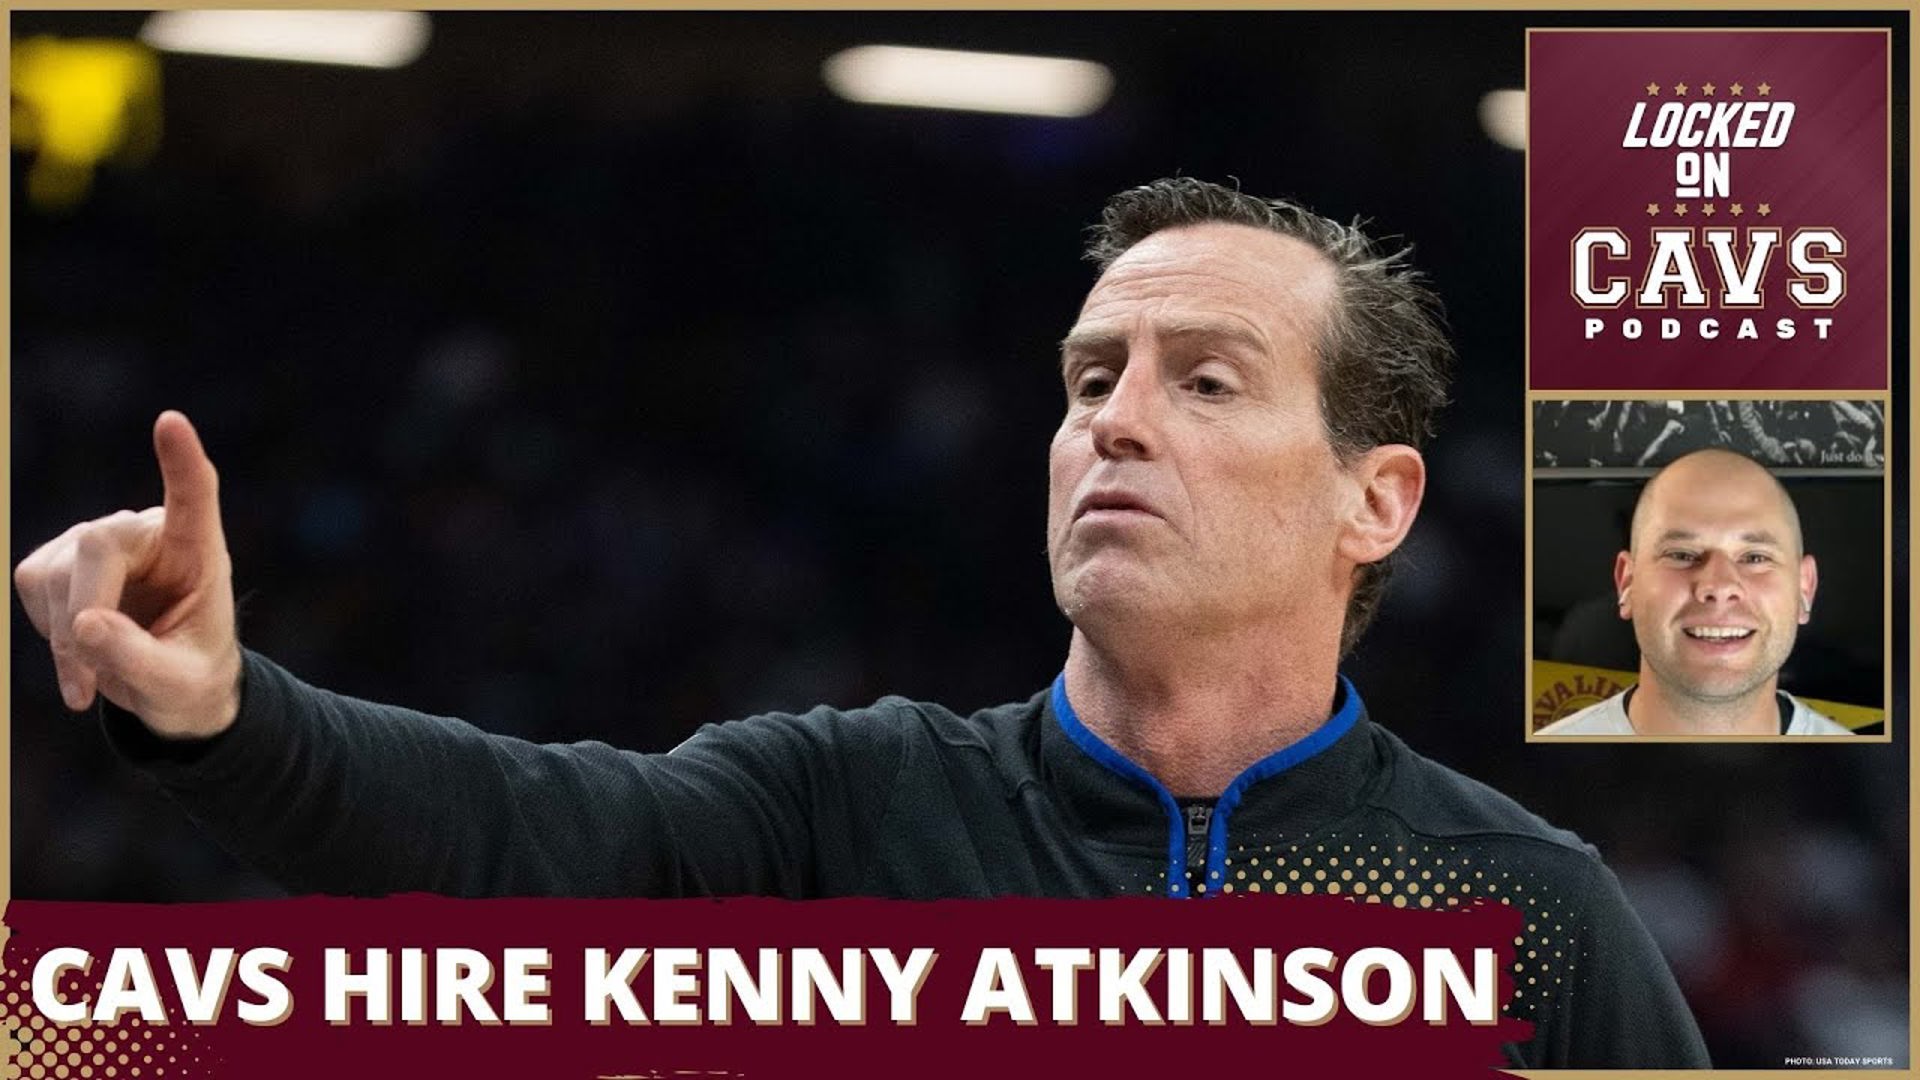 The Cleveland Cavaliers are hiring Kenny Atkinson as the team’s next head coach.